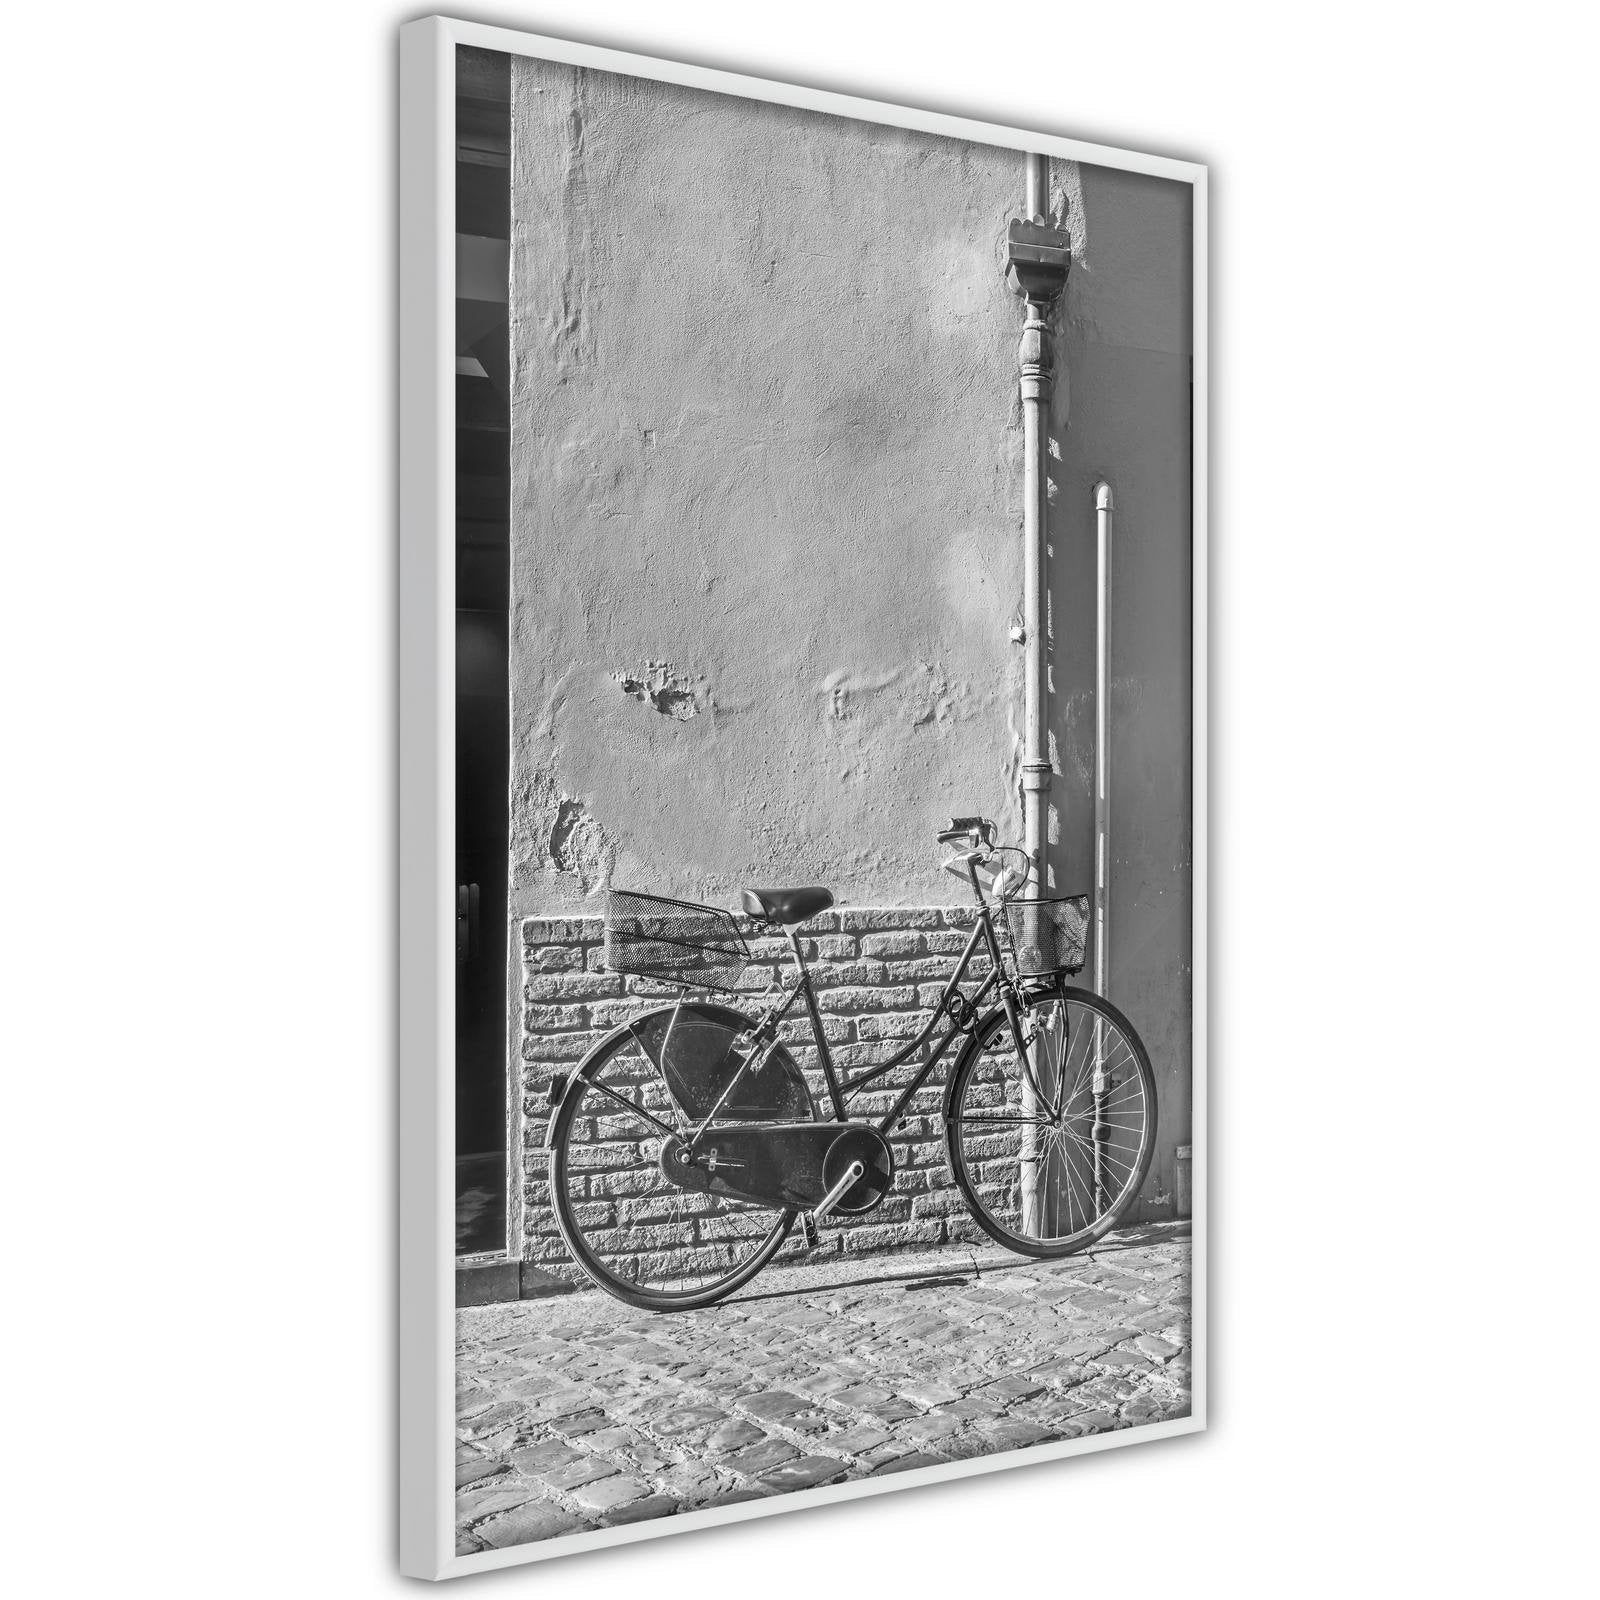 Inramad Poster / Tavla - Bicycle with Black Tires-Poster Inramad-Artgeist-peaceofhome.se